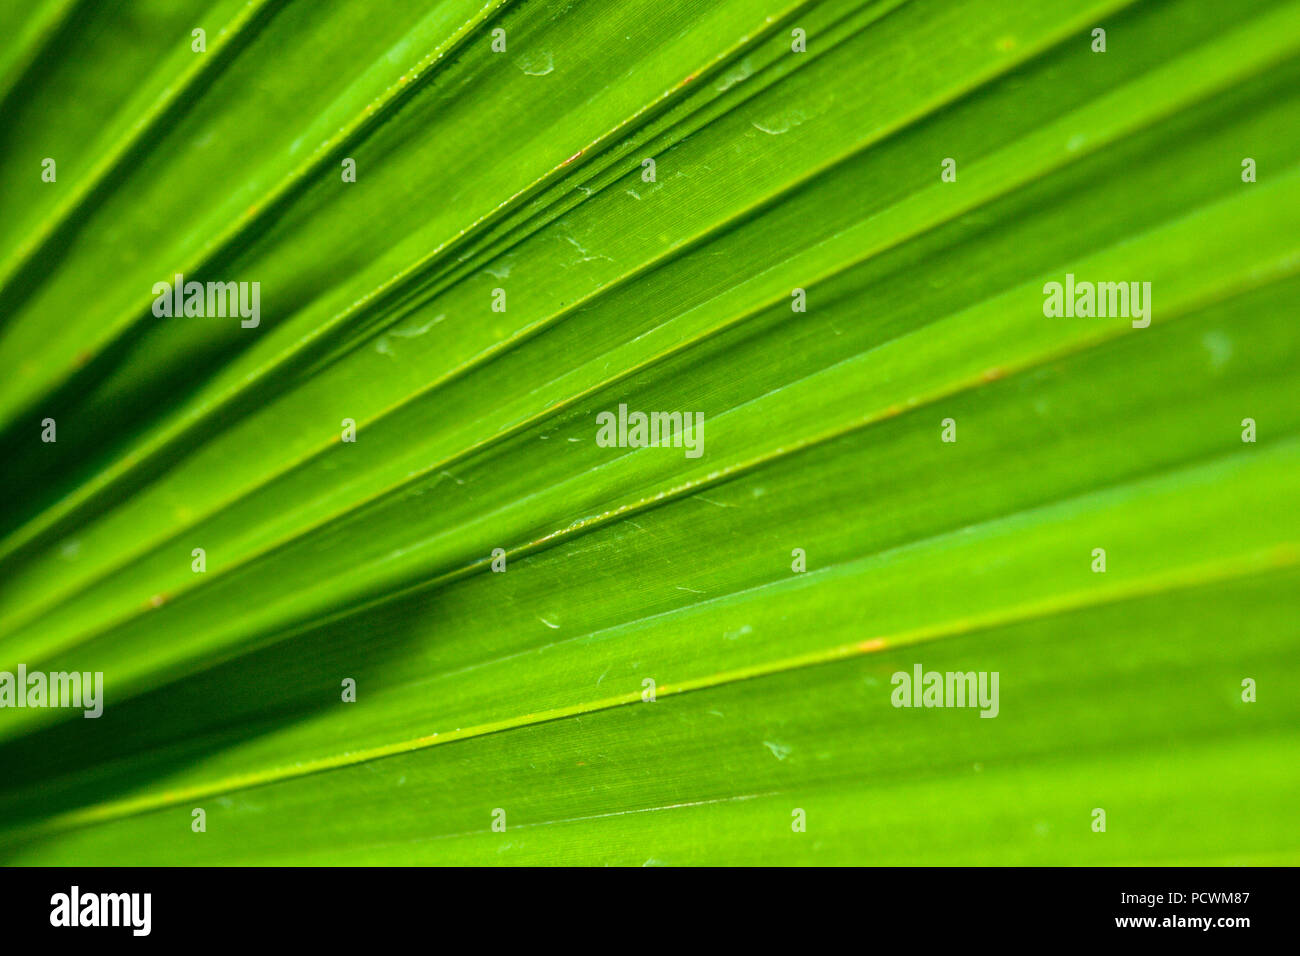 more diffrent plants pattern and wallpaper Stock Photo